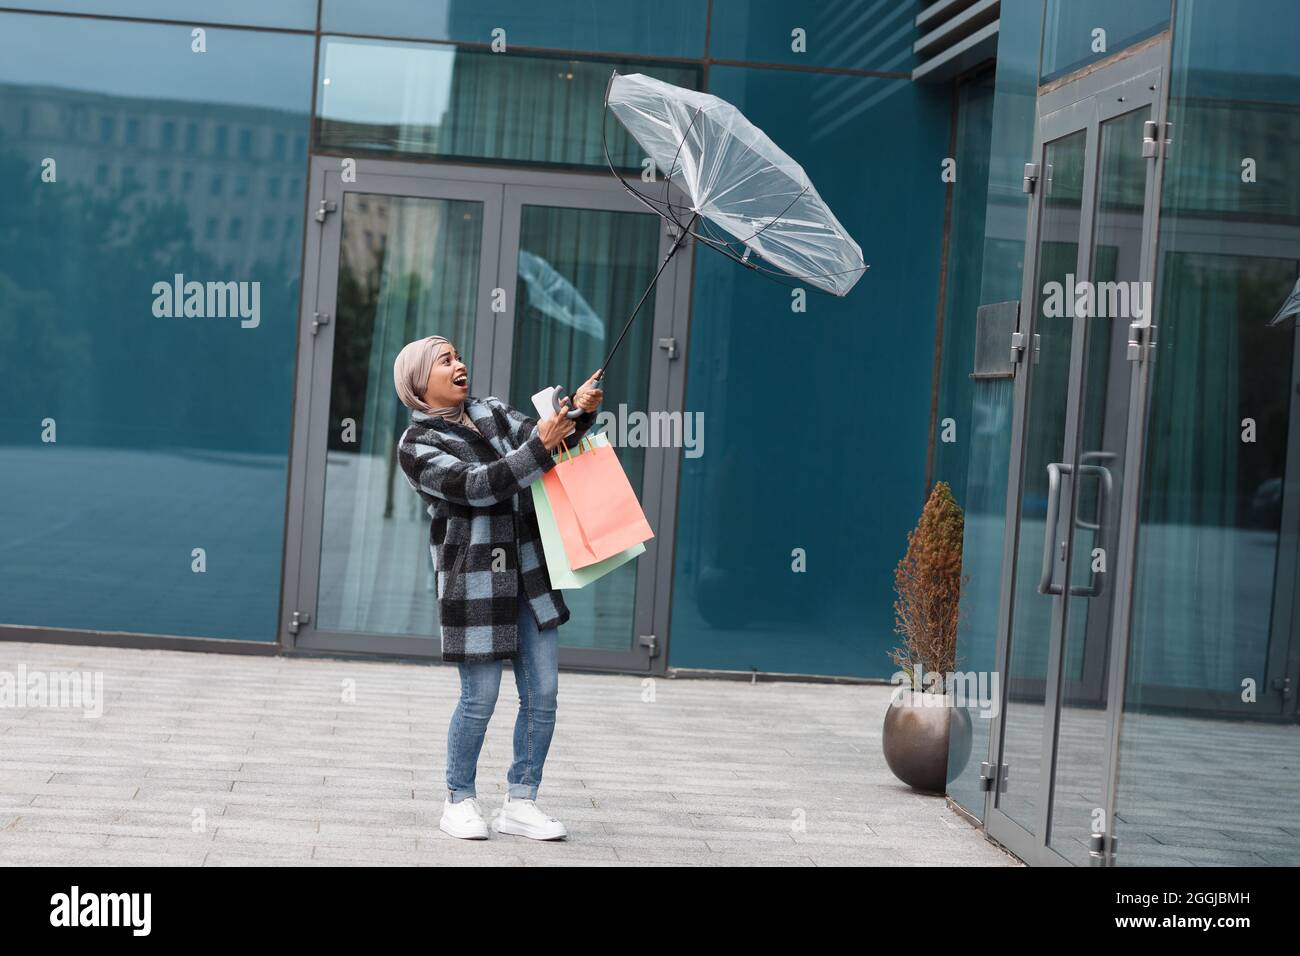 Walk to mall and shopping. Woman trying to keep her umbrella under strong wind Stock Photo